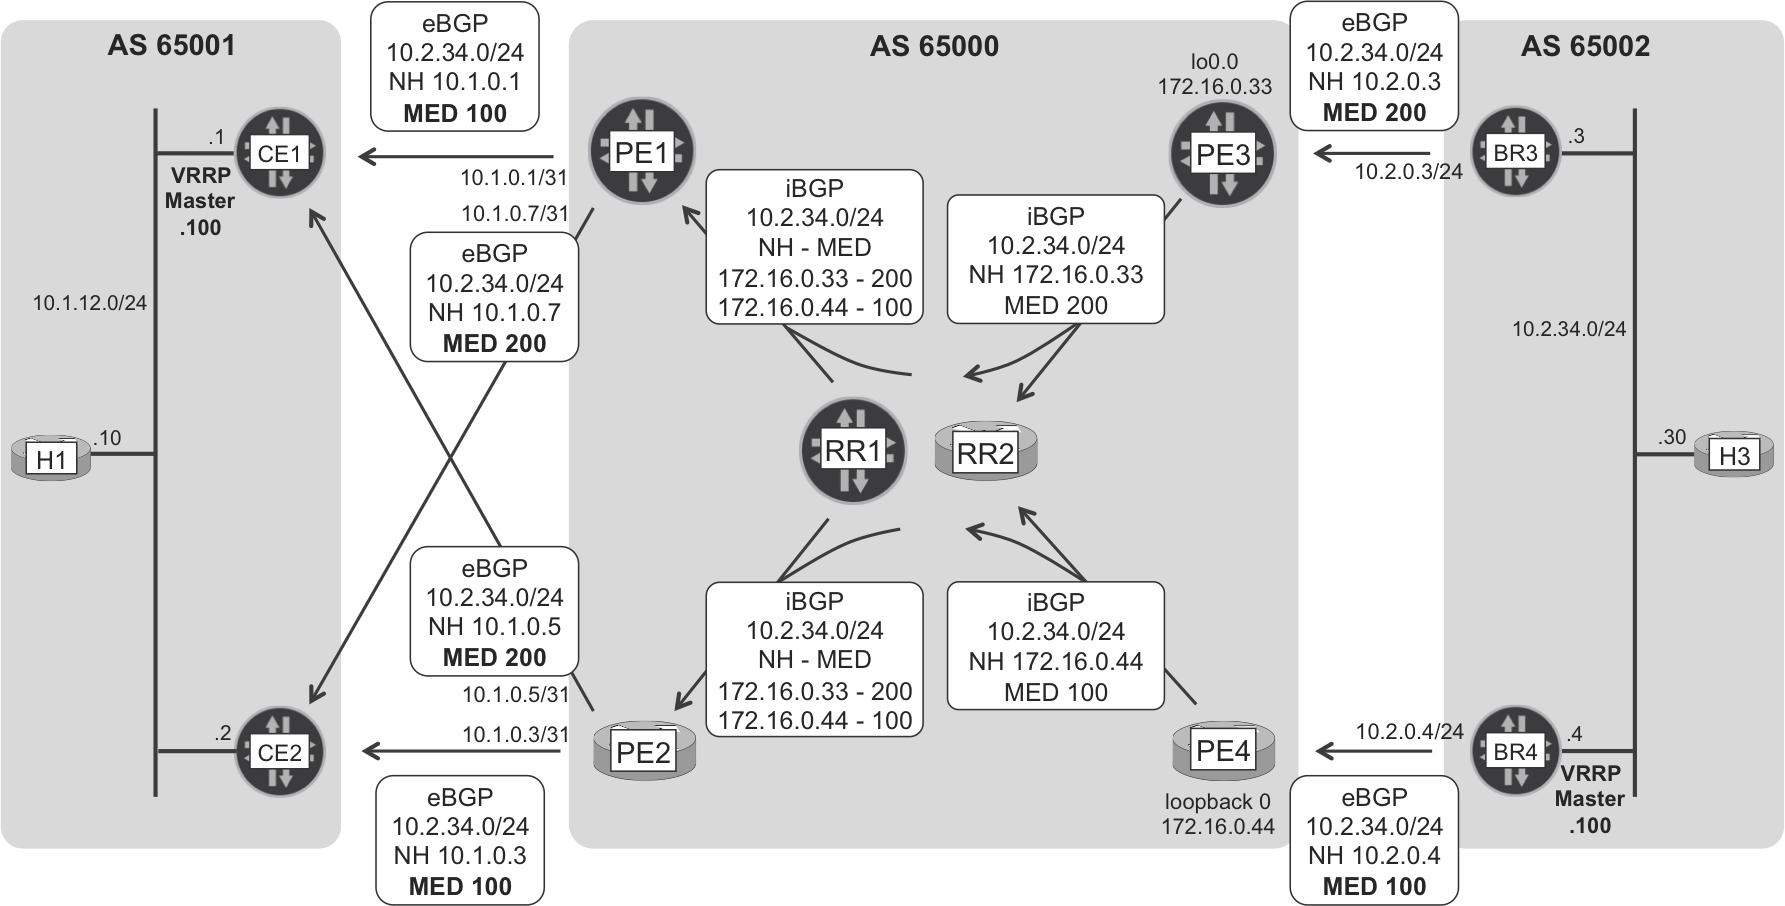 Internet eBGP and iBGP route signaling—H3’s subnet